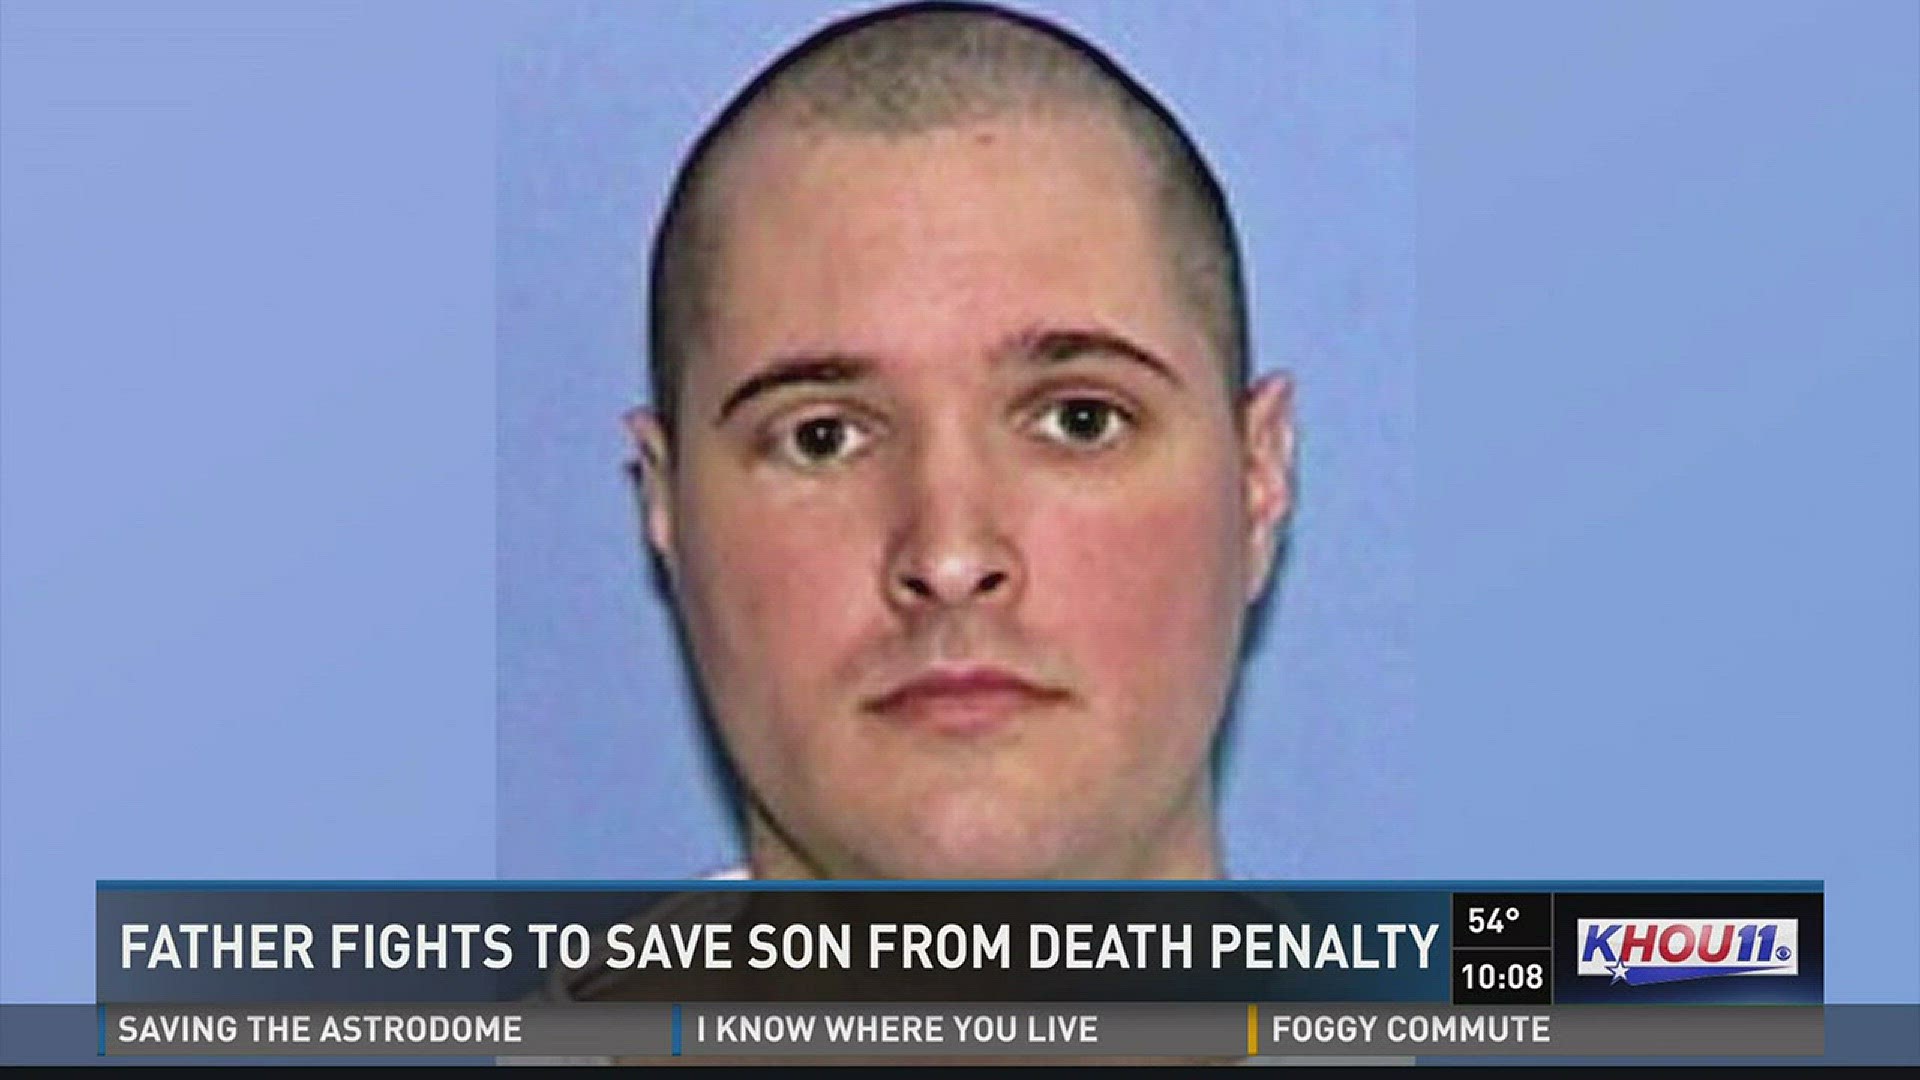 A Sugar Land father is pleading for his son's life to be spared.